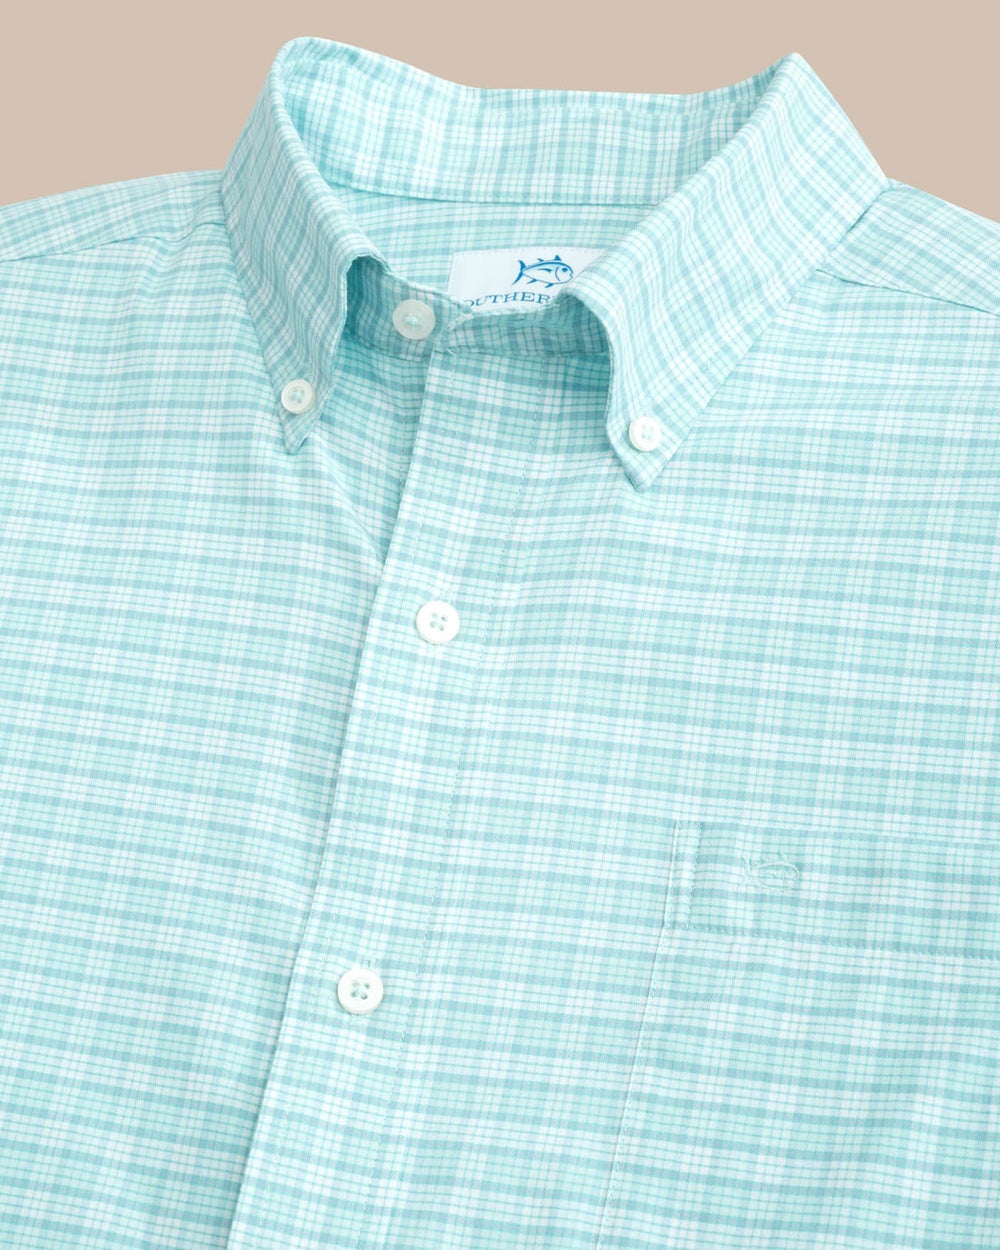 The detail view of the Southern Tide Coastal Passage Trailside Plaid Long Sleeve Sport Shirt by Southern Tide - Wake Blue